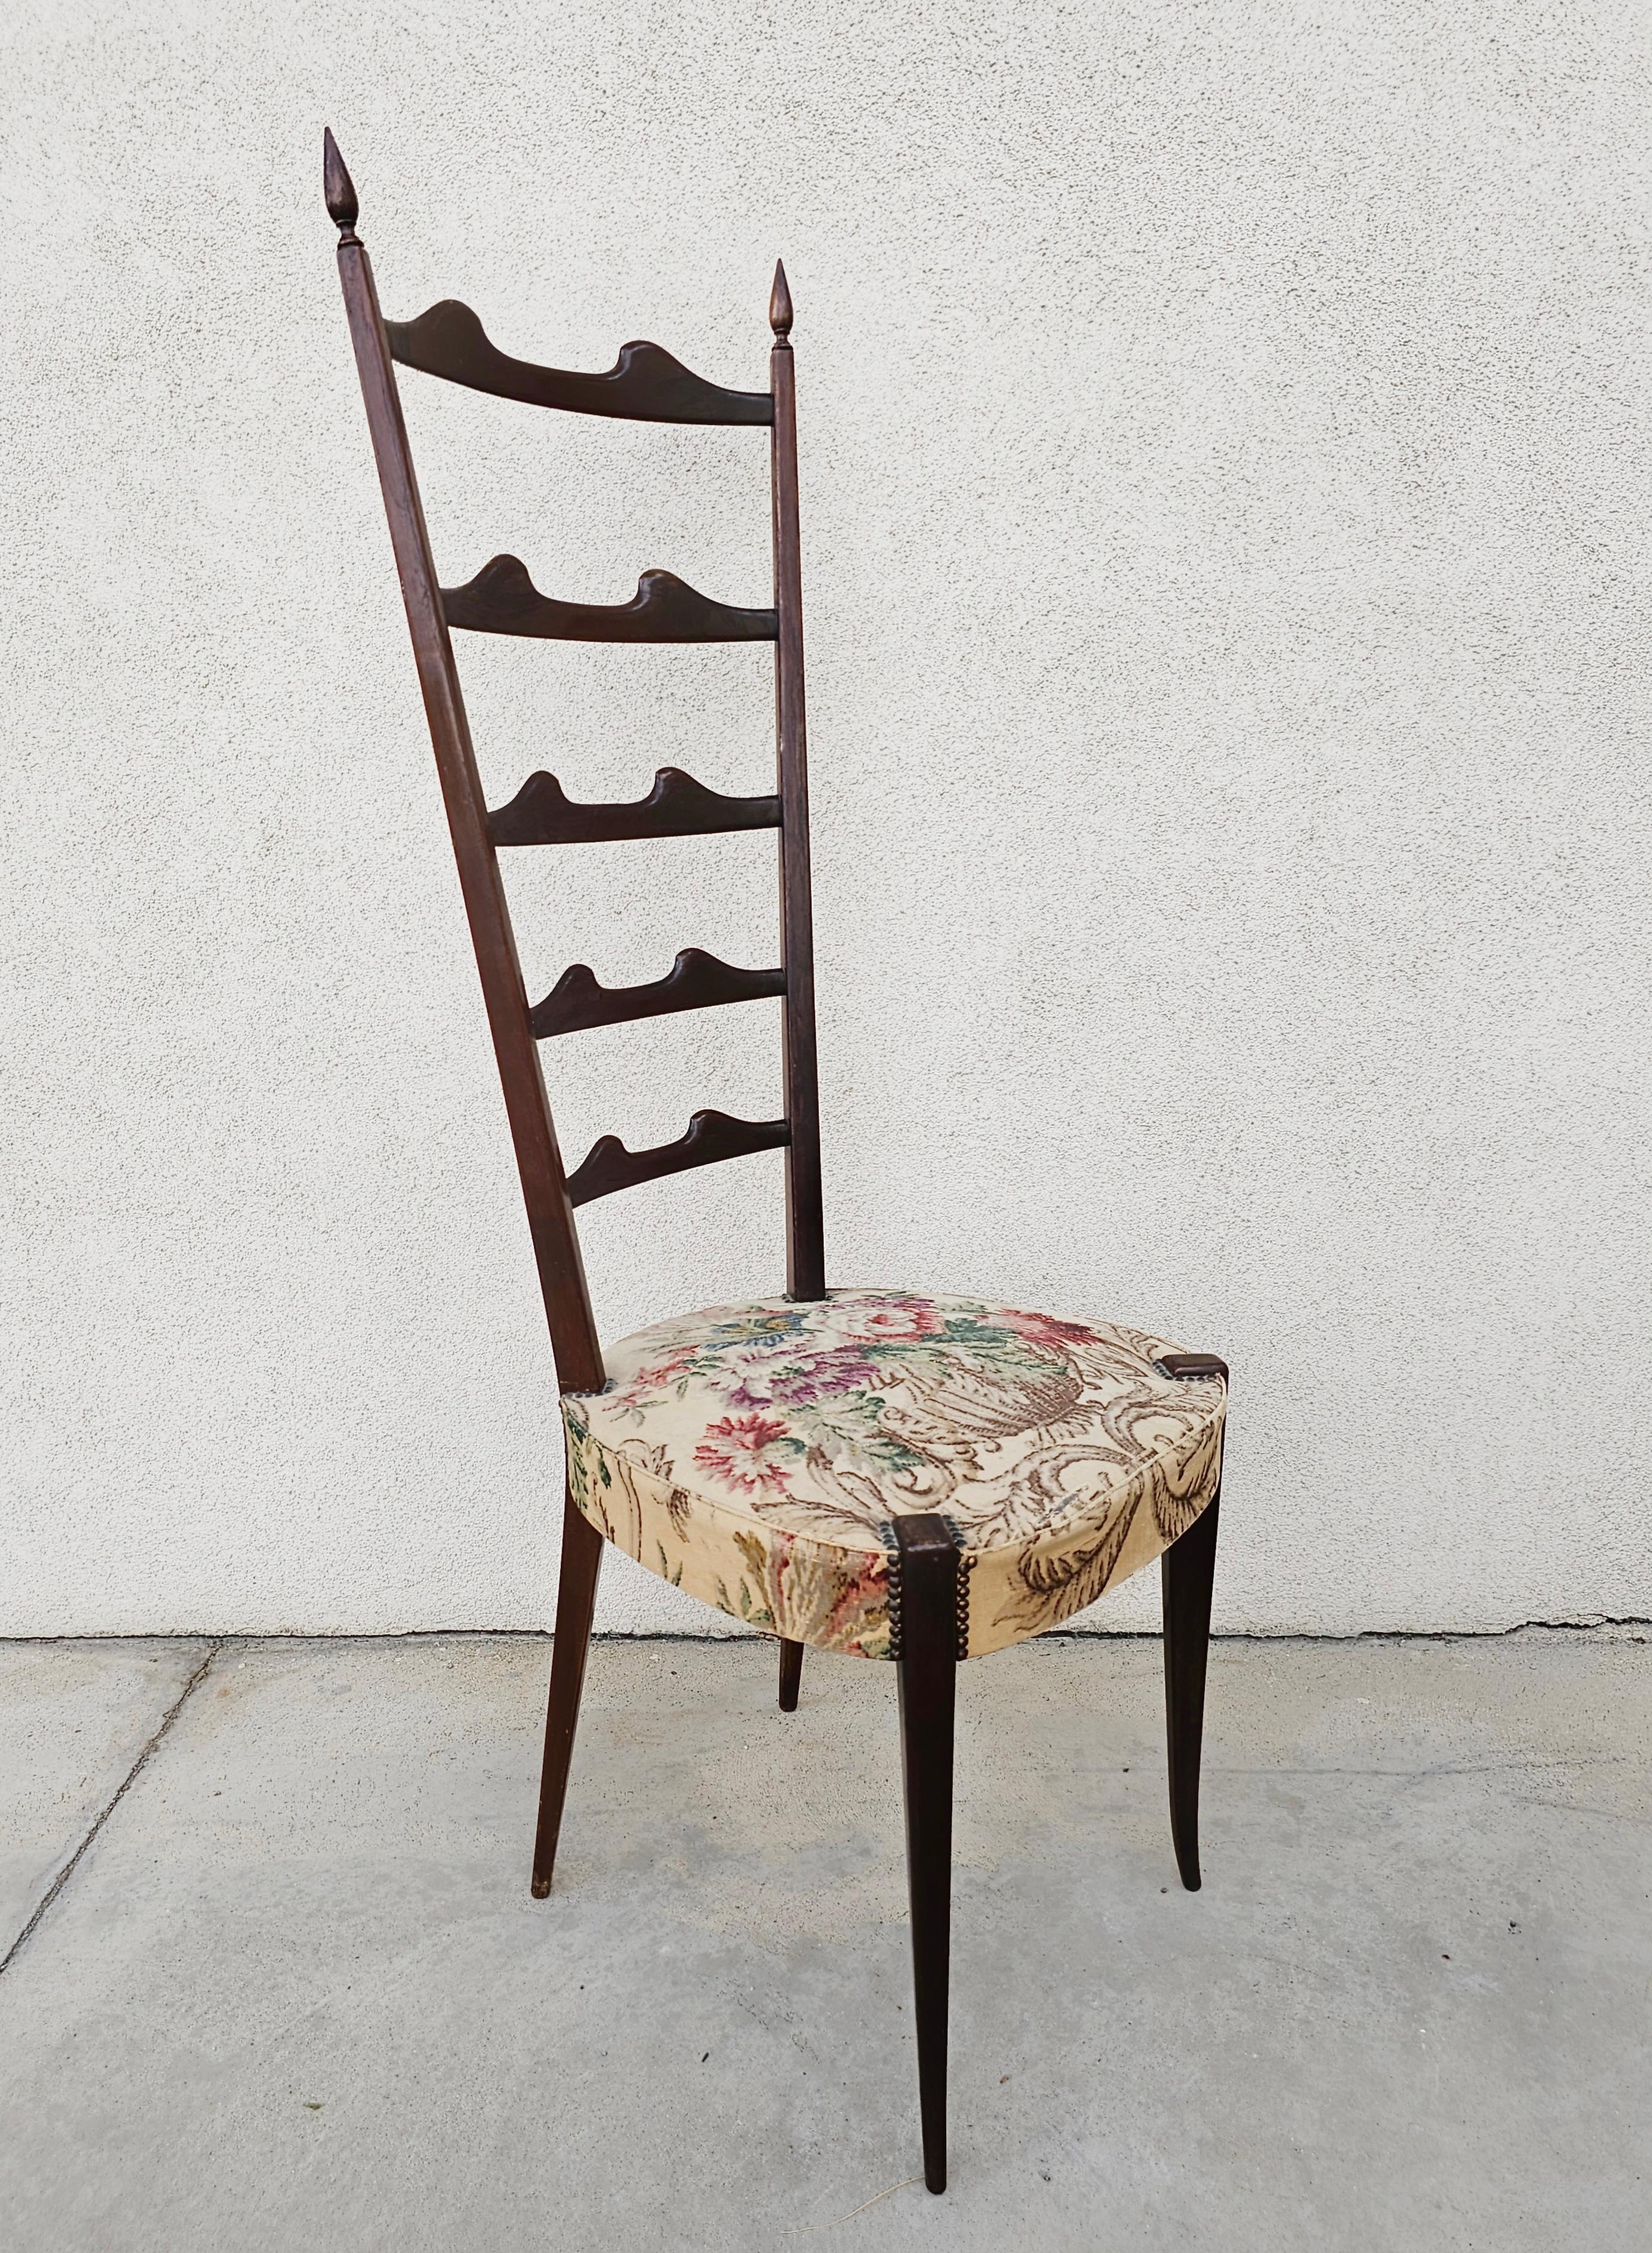 Mid-20th Century High Backrest Chiavari Chairs done in Mahogany by Paolo Buffa Pair, Italy 1950s For Sale